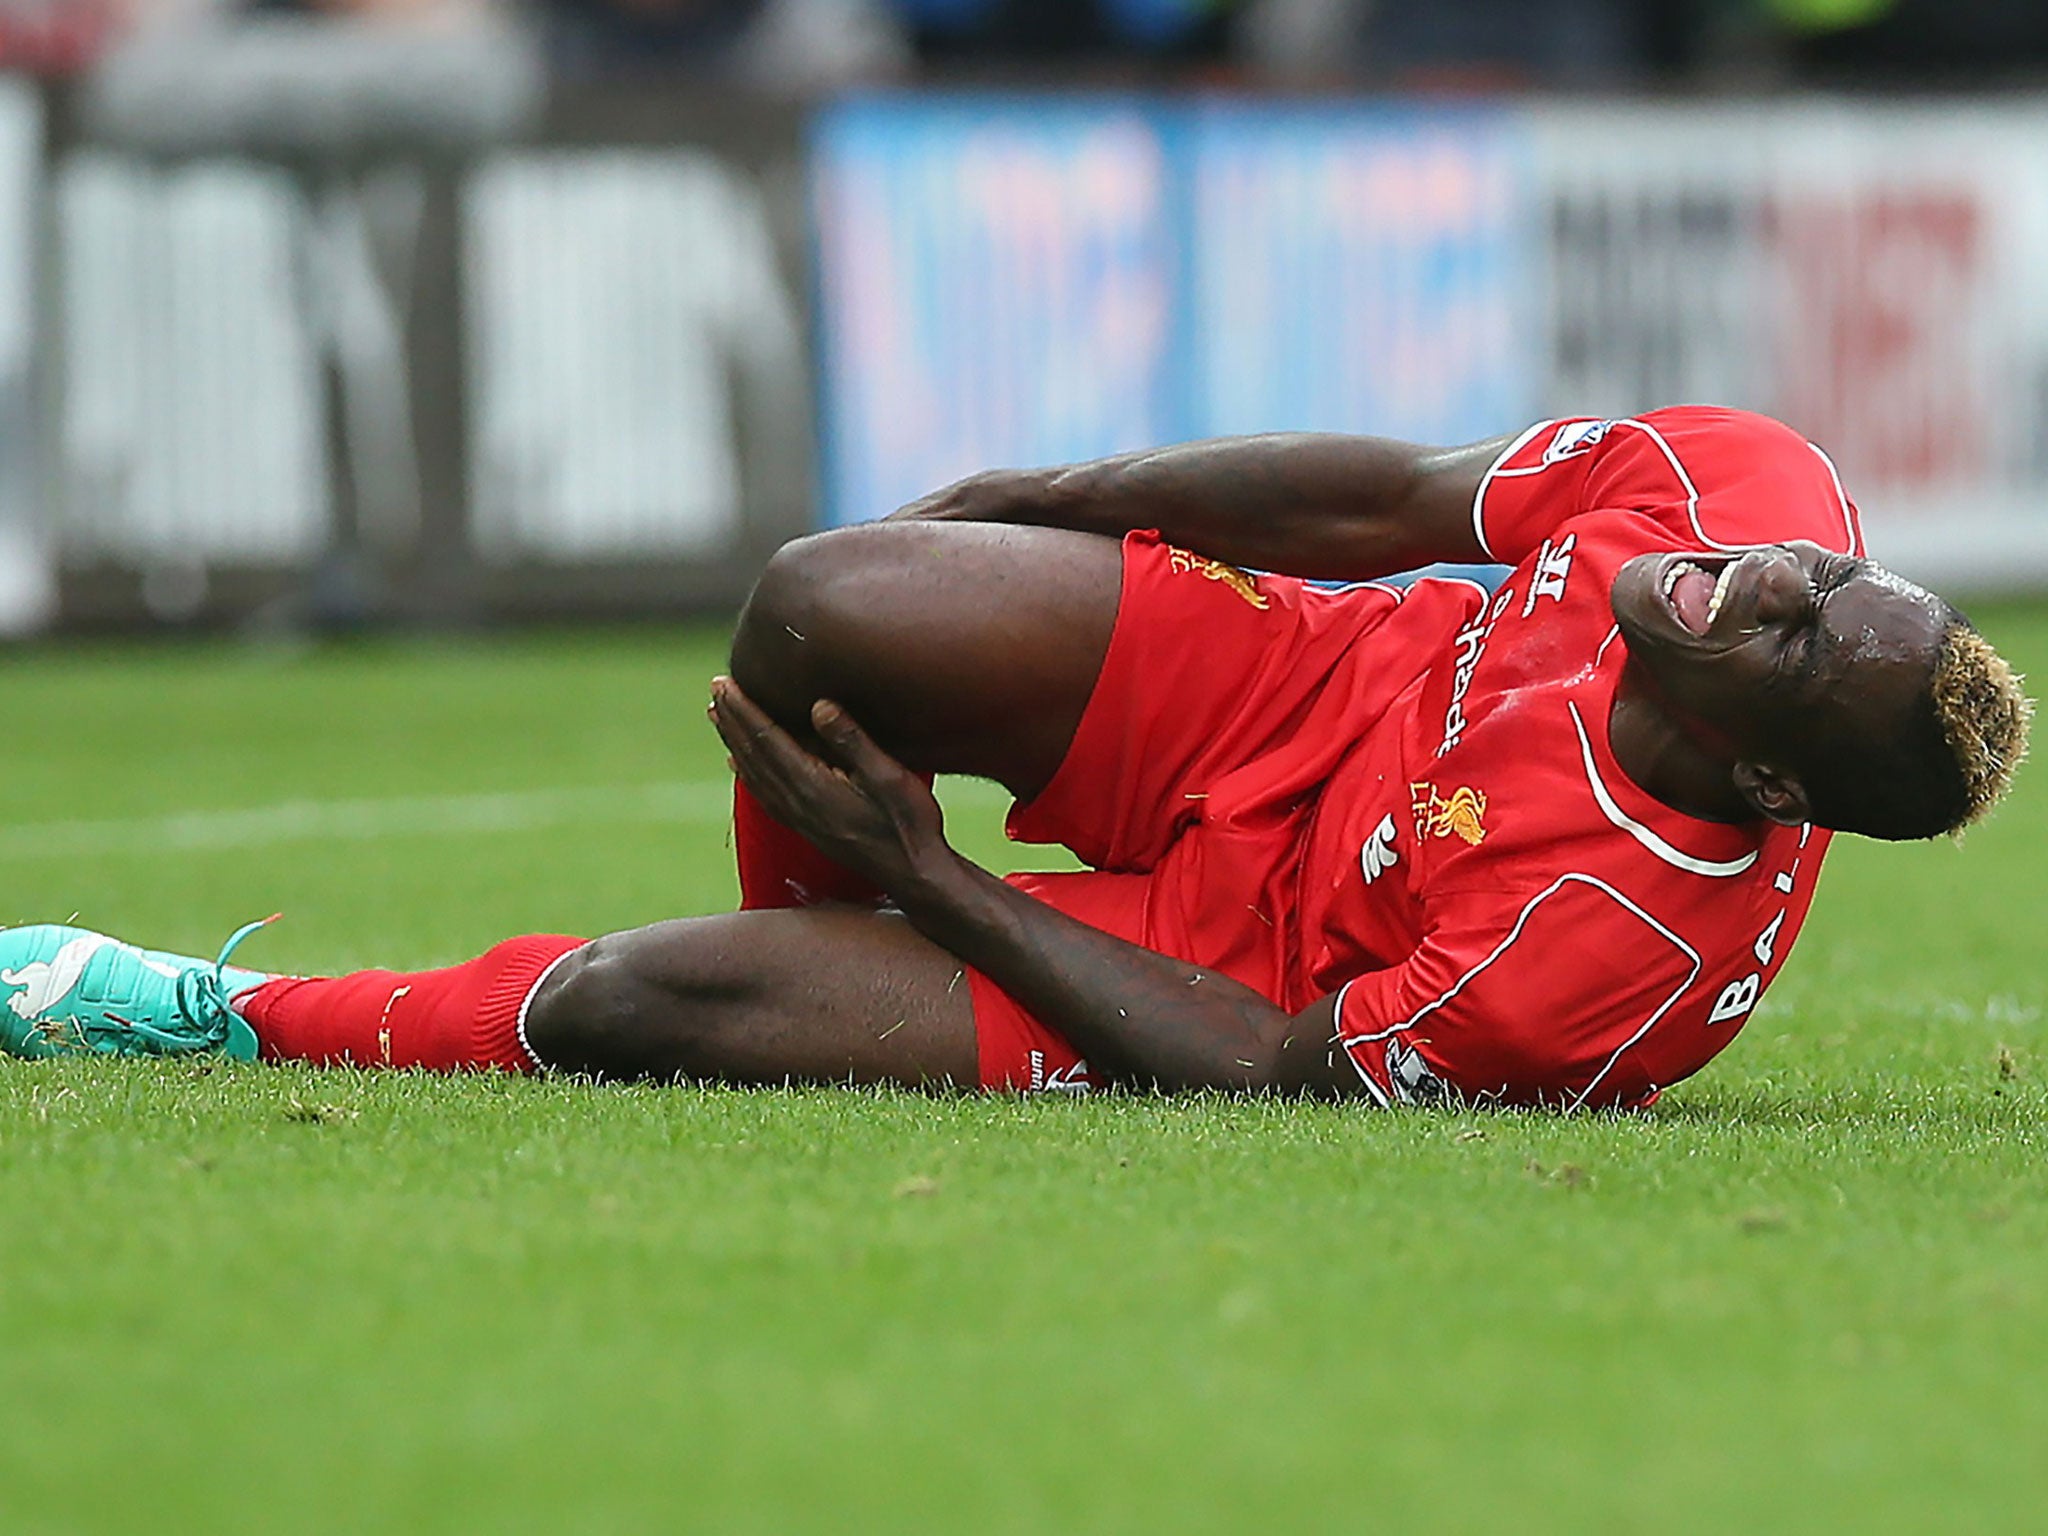 Mario Balotelli has been the target of abuse on social media more than any other player